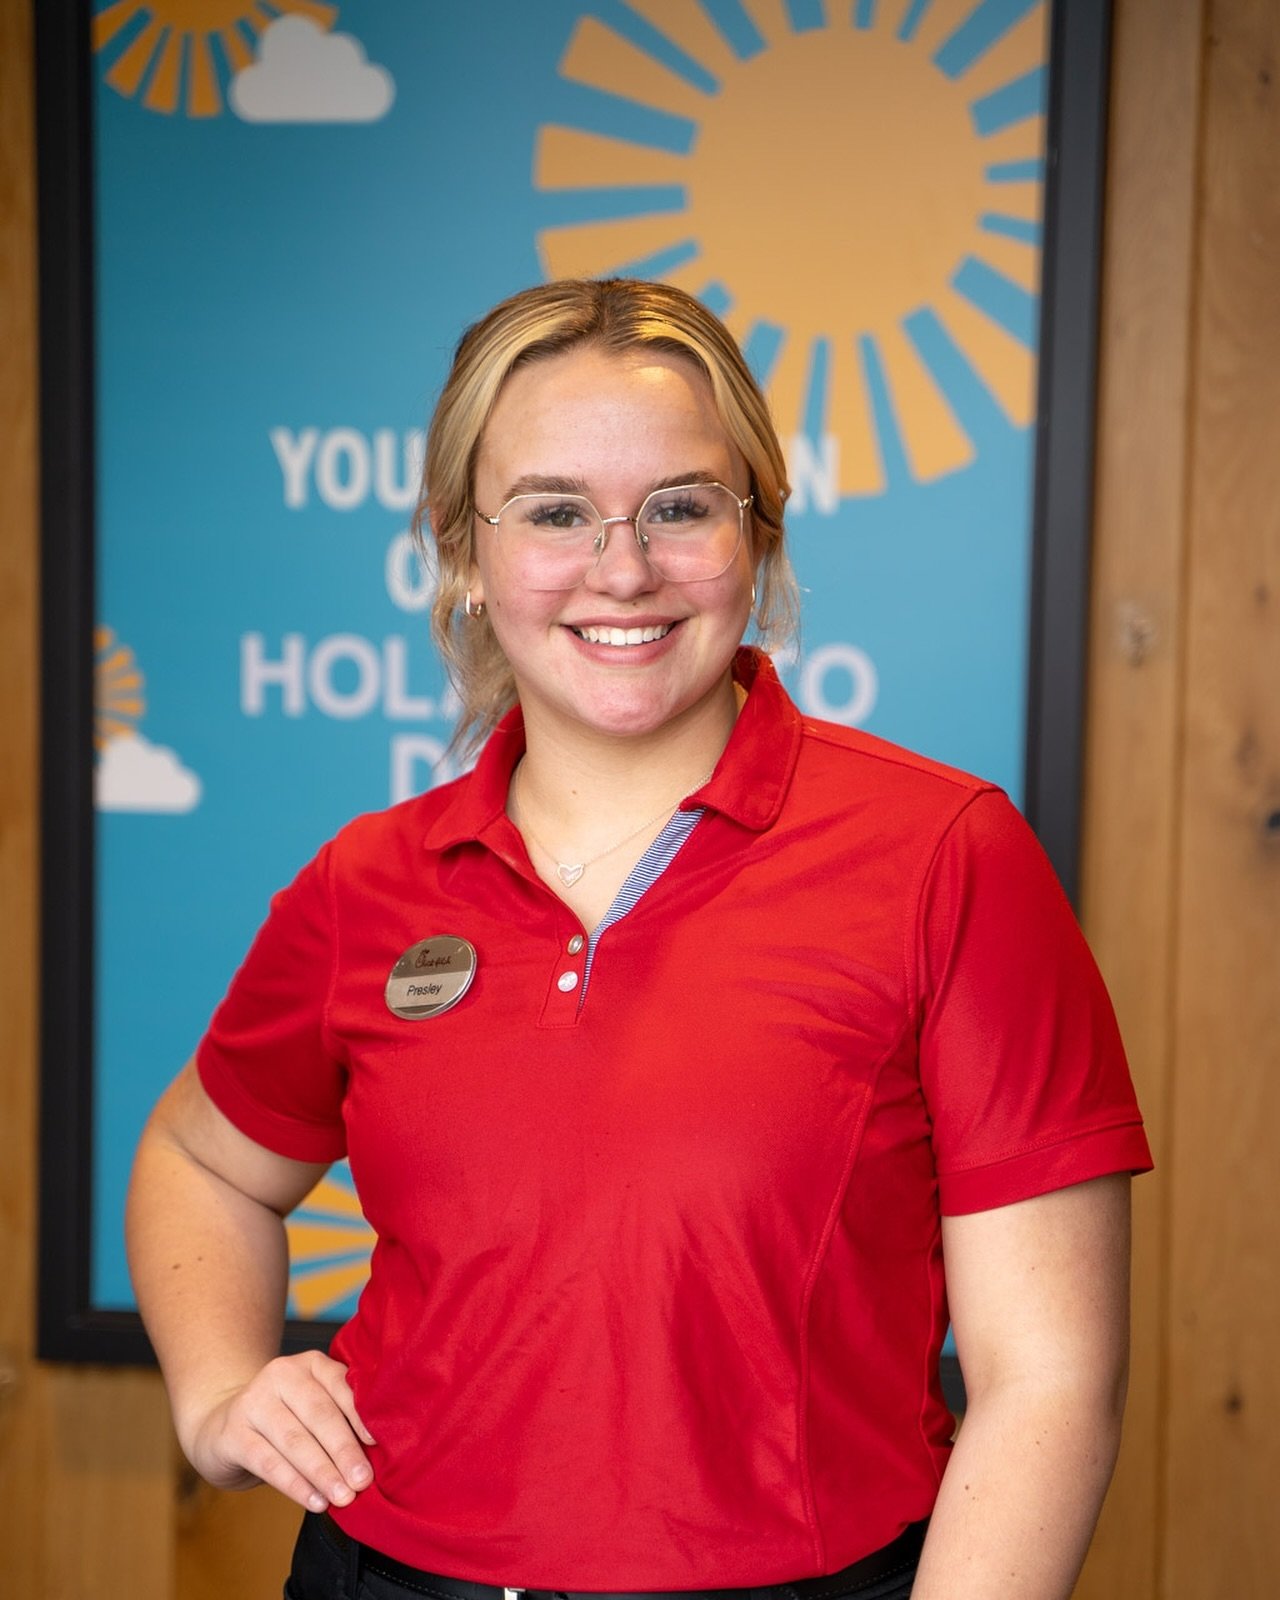 Meet Presley: Our ray of sunshine ☀️ Bringing sweetness and bubbly energy to our team! 

Thank you for all your hard work and dedication! 

&bull;

&bull;

&bull;

#employeespotlight #employeeappreciation #chickfila #corsicana #corsicanatx